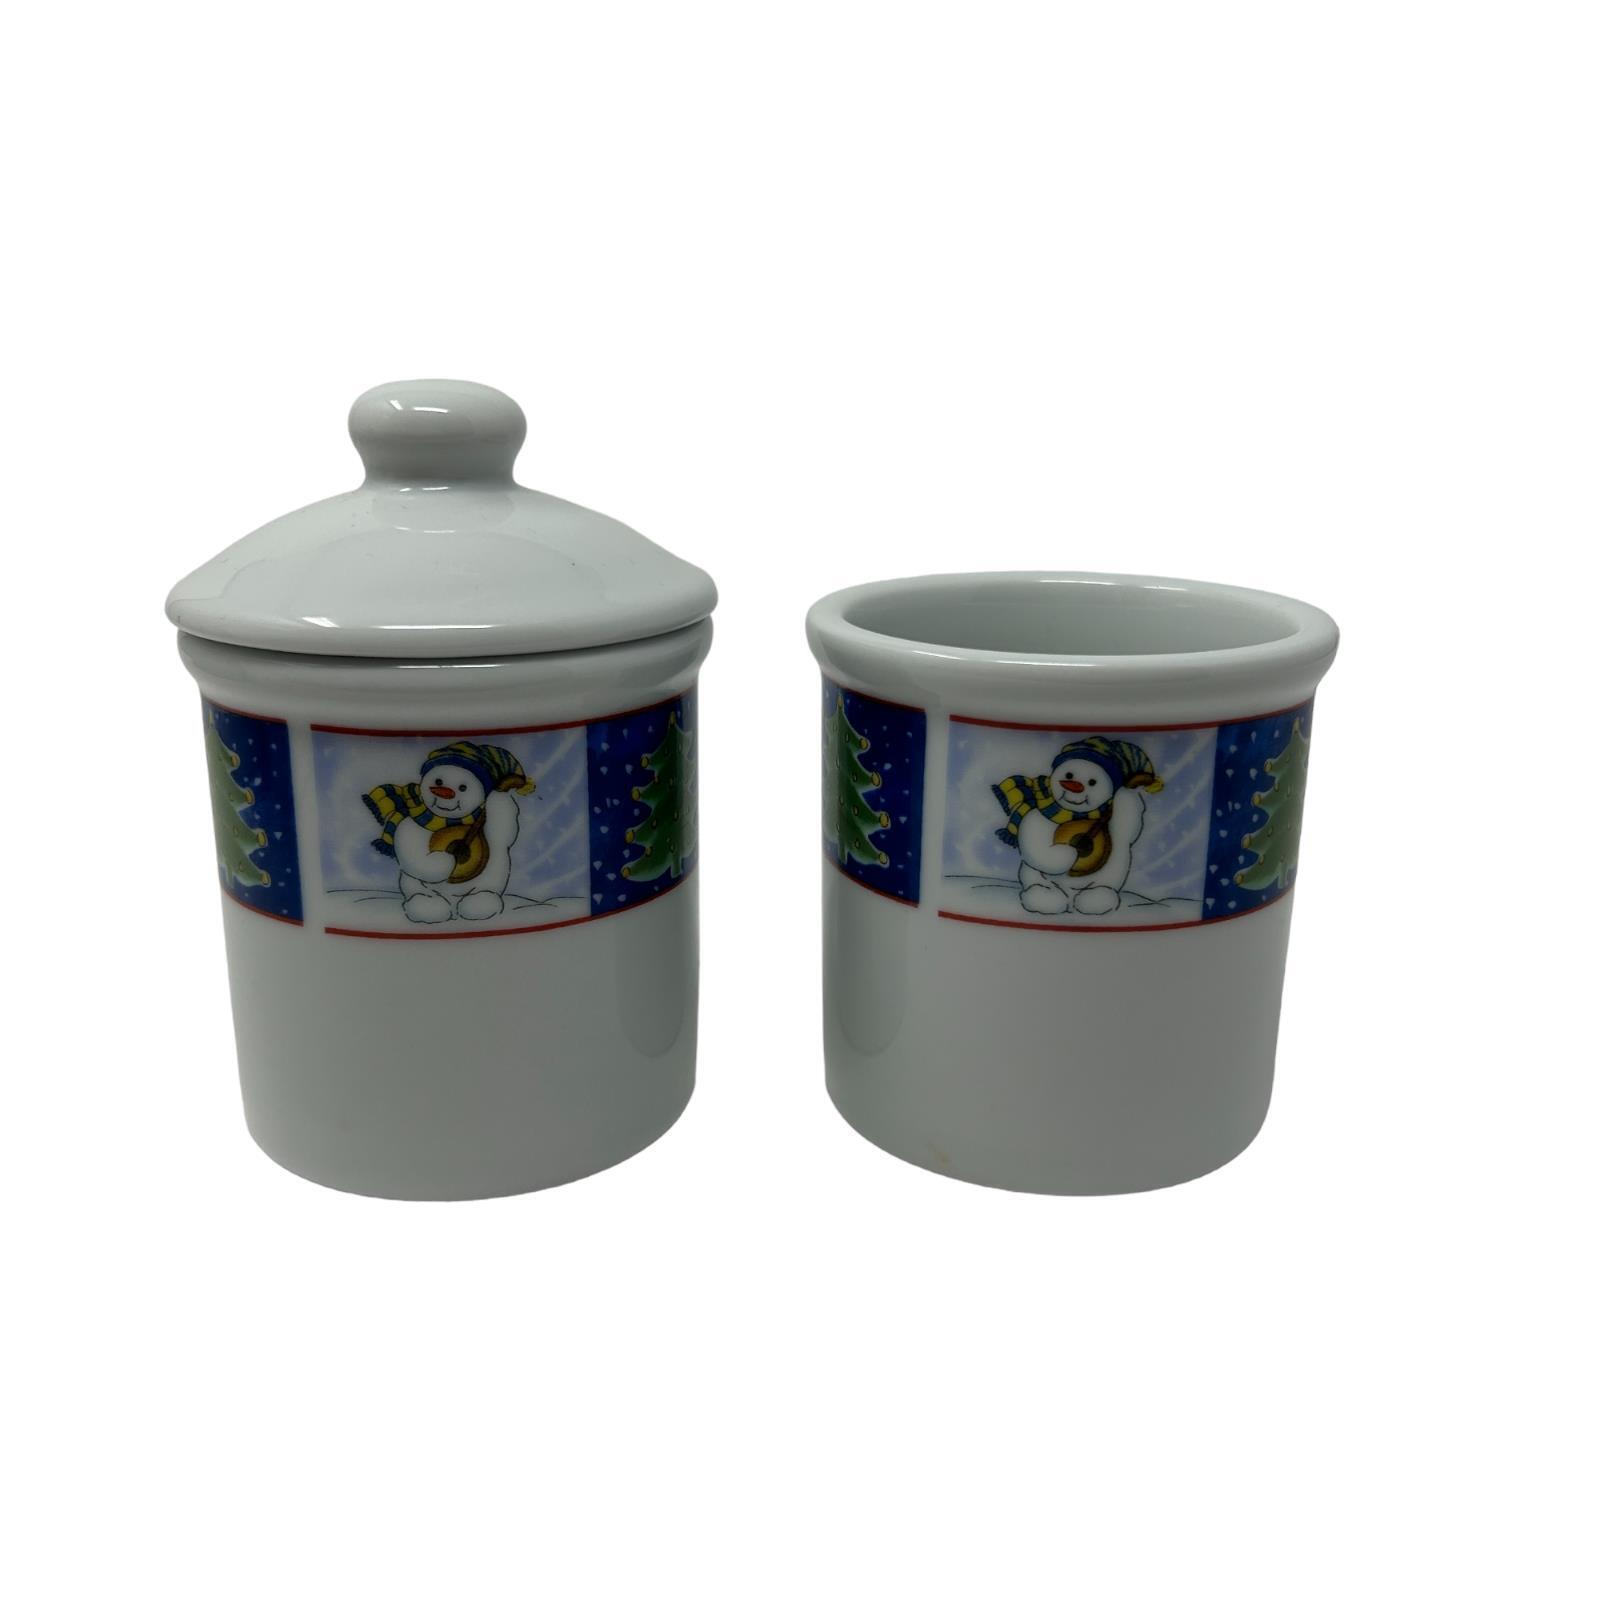 Royal Norfolk Snowman Sugar Bowl Containers Set of 2